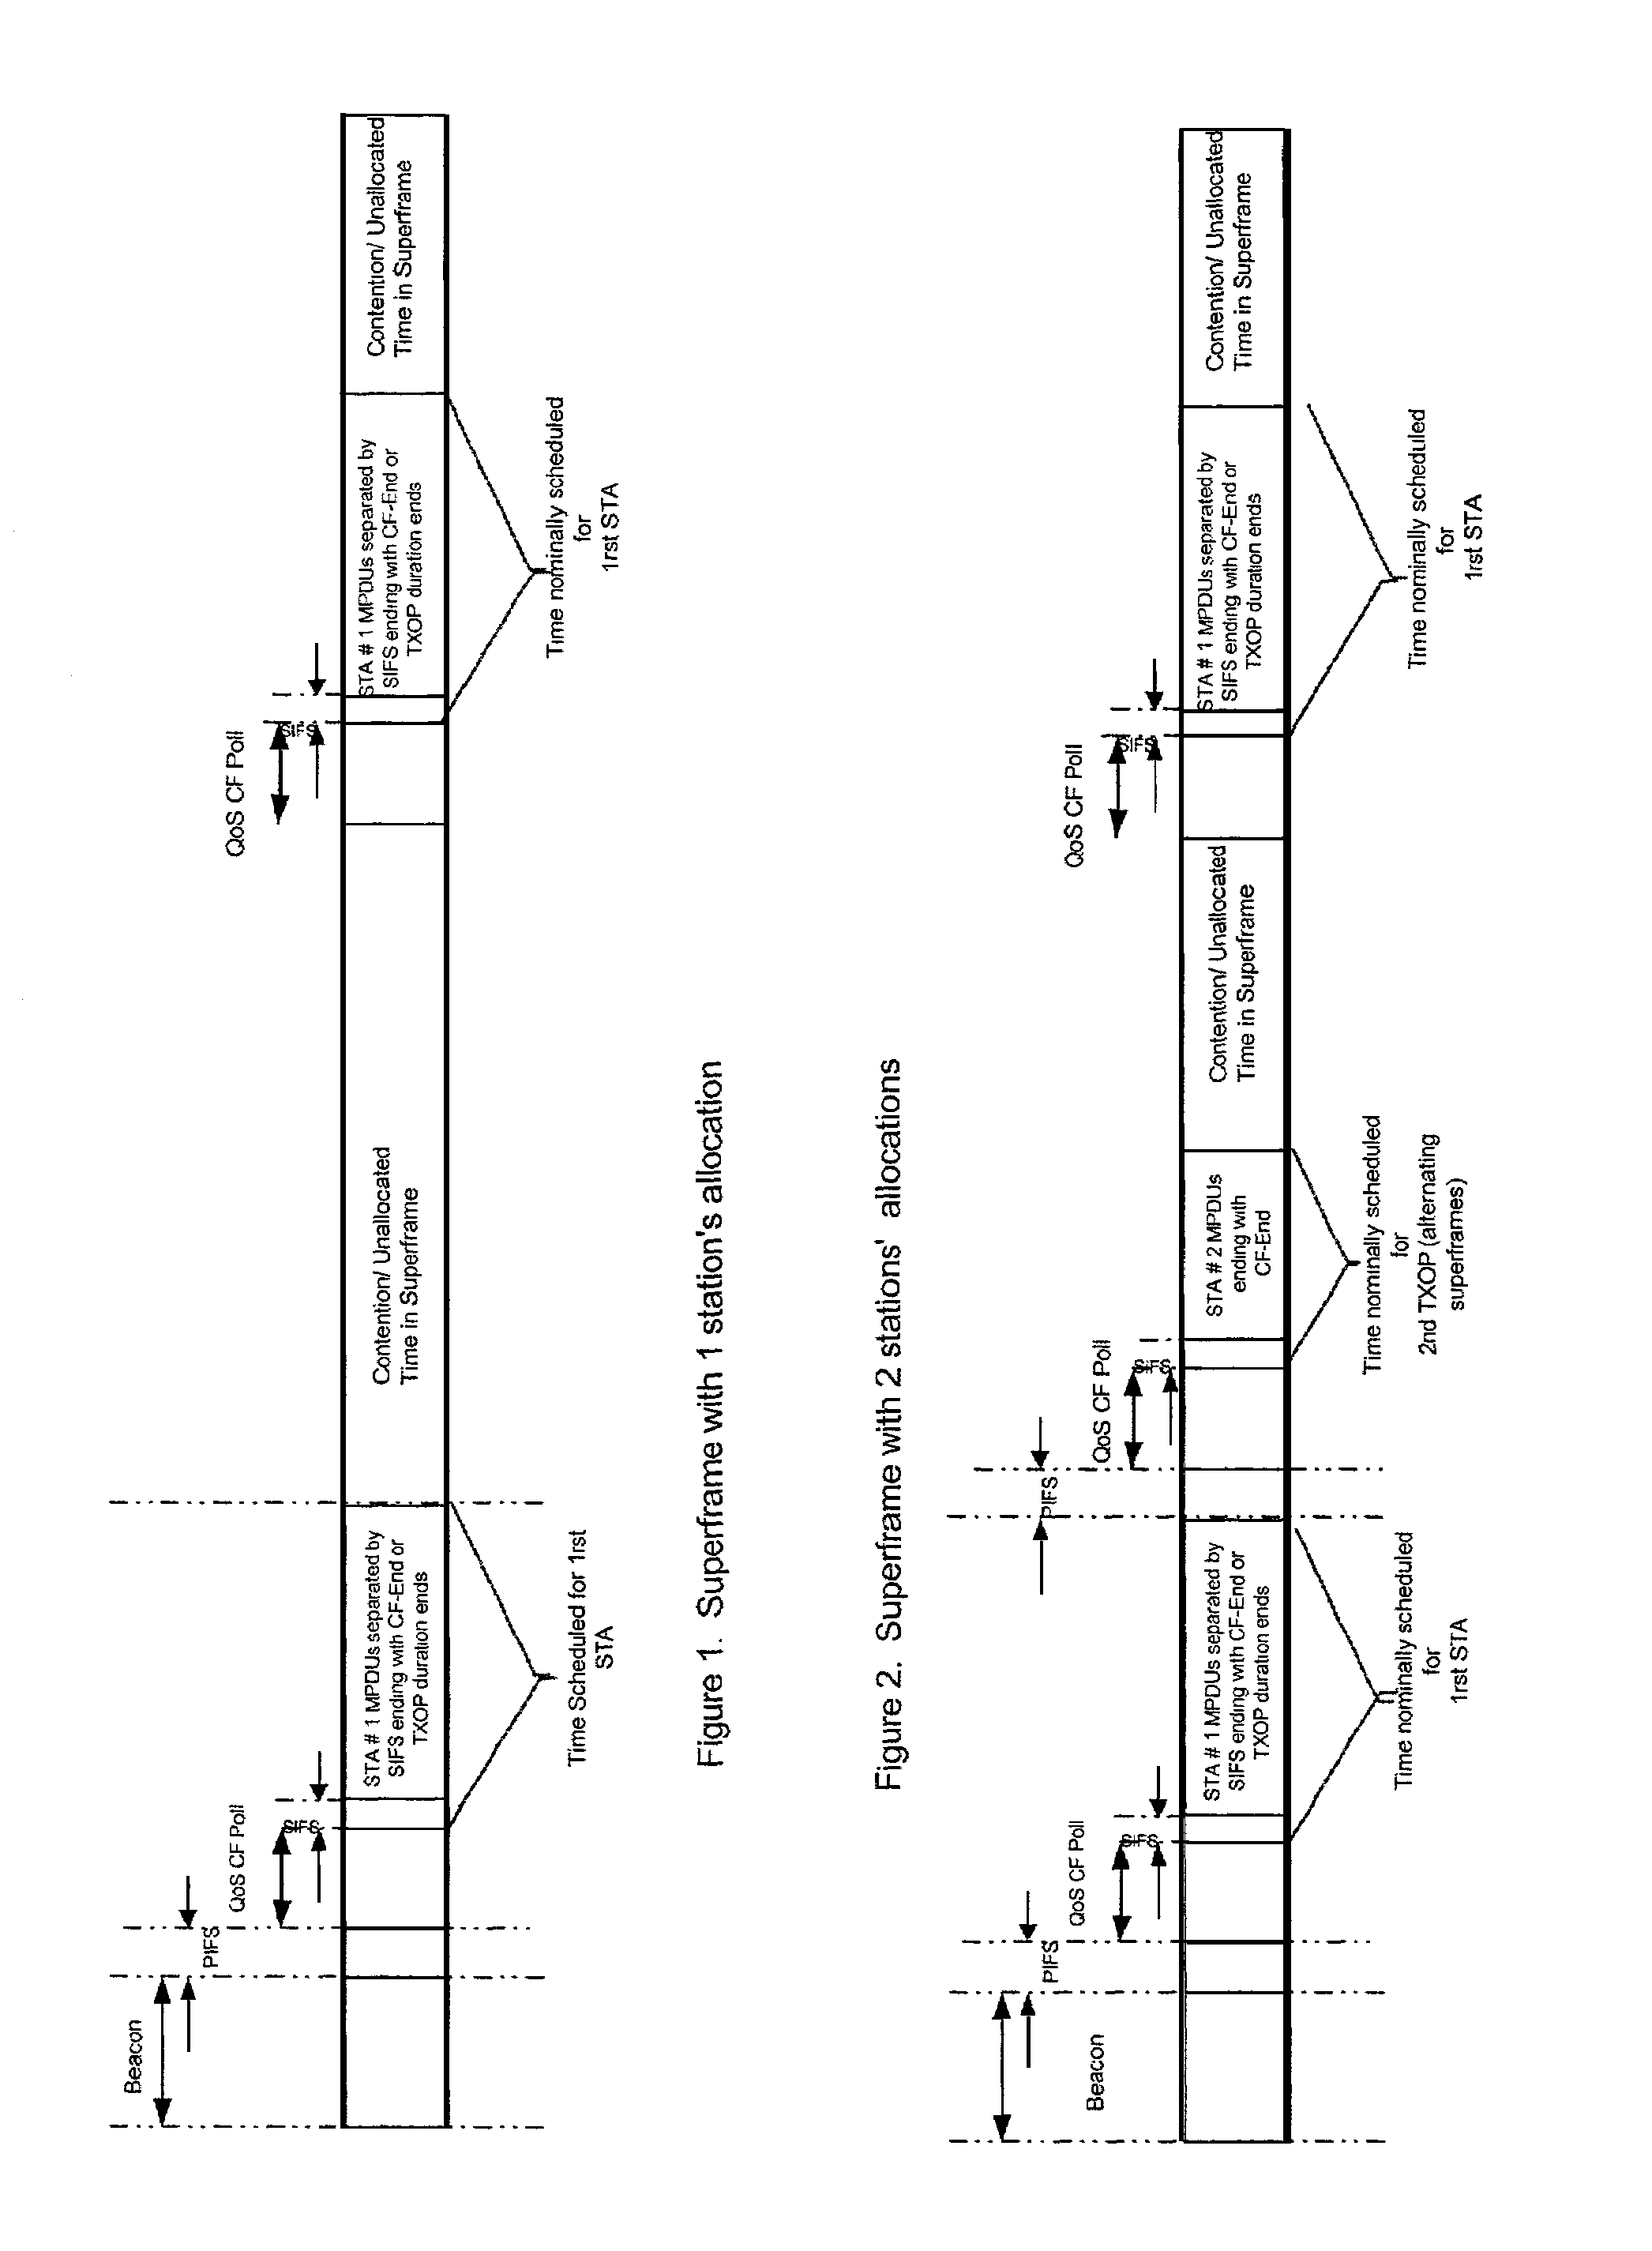 Class of computationally parsimonious schedulers for enforcing quality of service over packet based AV-centric home networks